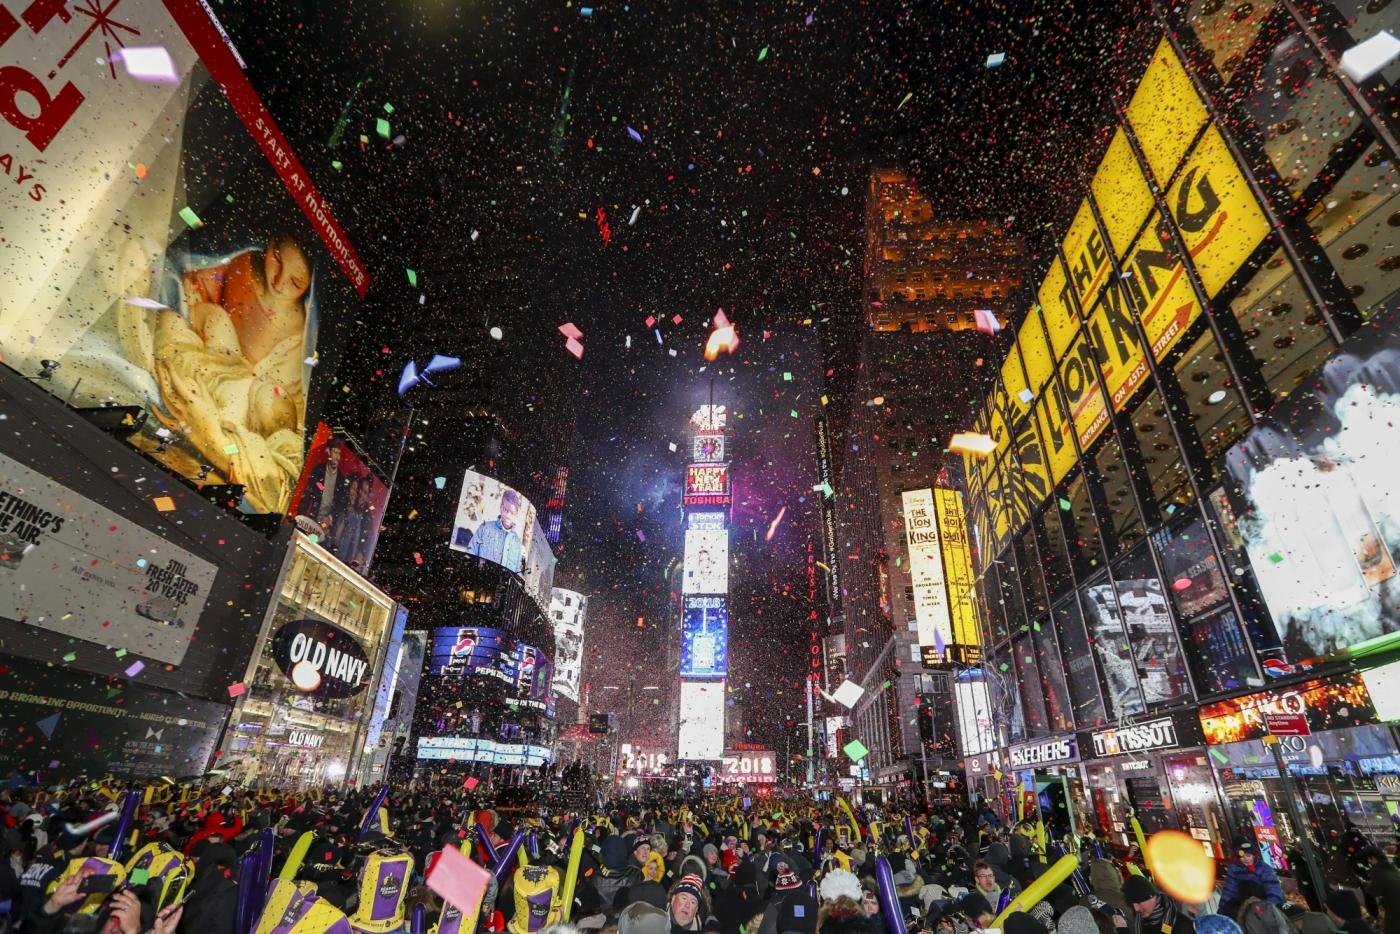 NEW YORK, Jan. 1, 2018 (Xinhua) -- People attend the New Year celebration at Times Square in New York, the United States, on Jan. 1, 2018. (Xinhua/Wang Ying/IANS) by .